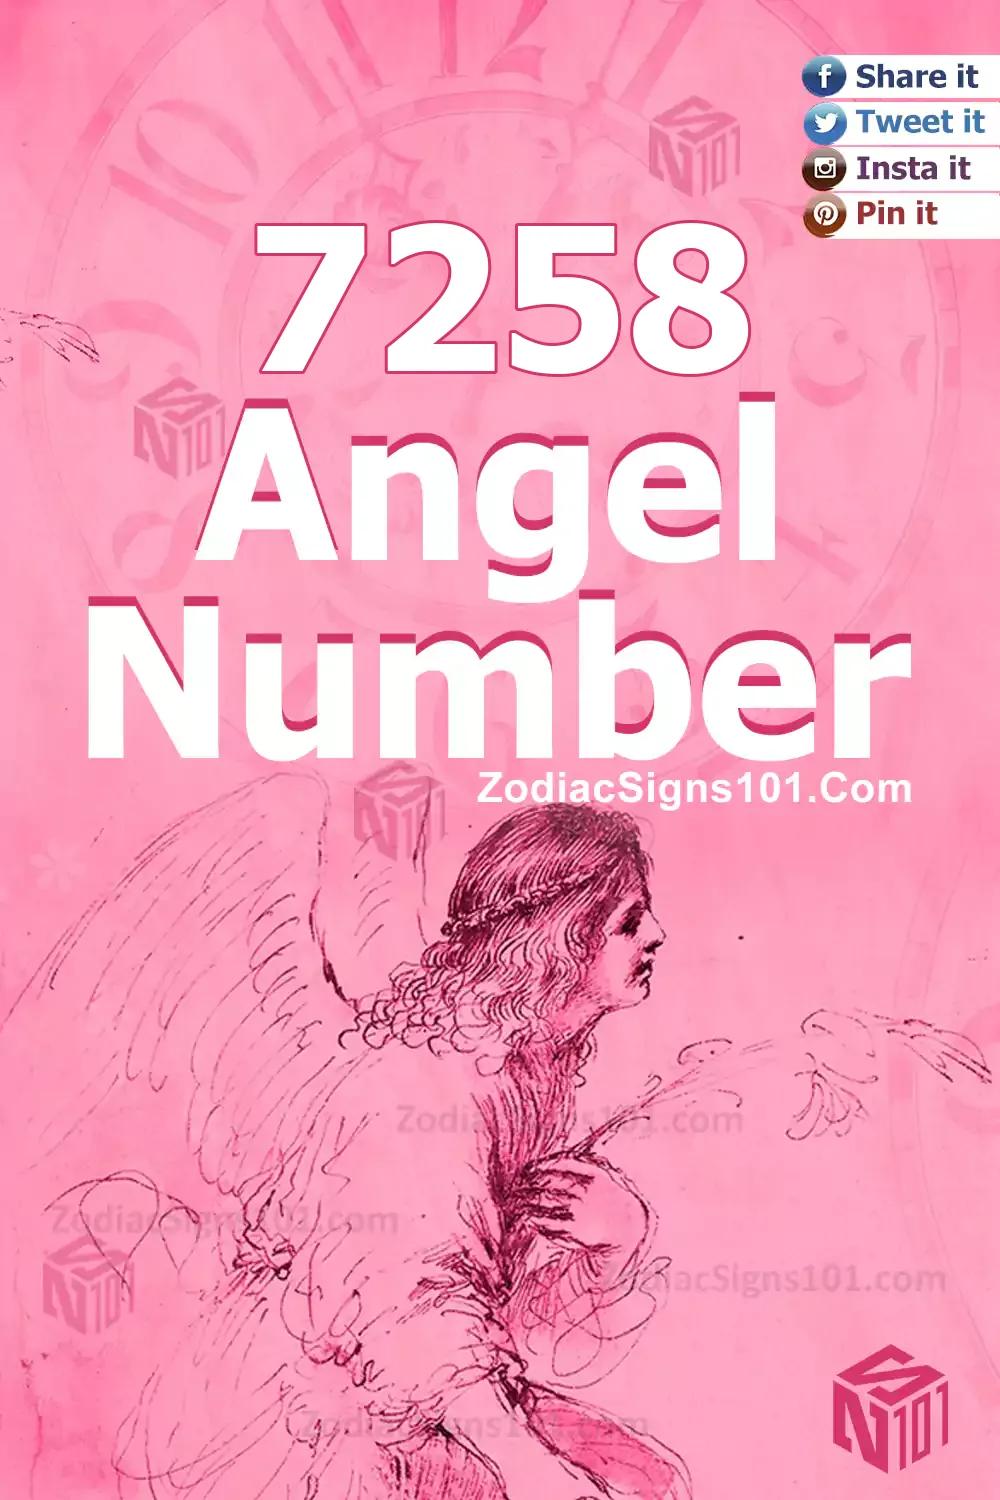 7258 Angel Number Meaning